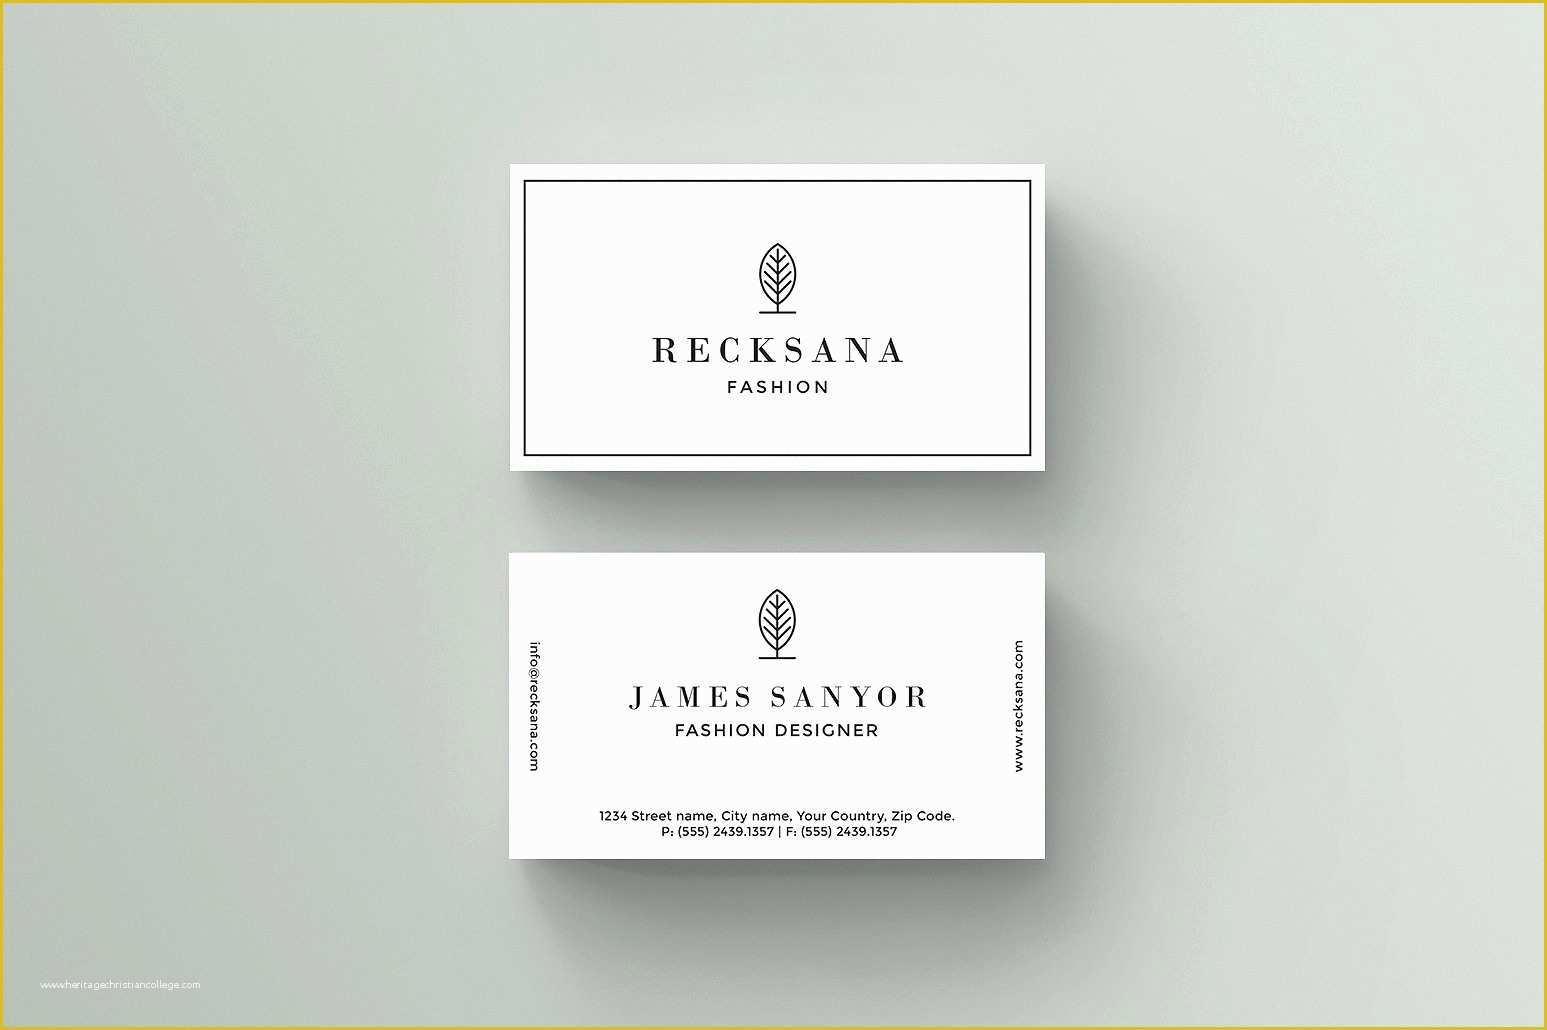 Indesign Business Card Template Free Of Business Card Free Templates for Blank Indesign Business